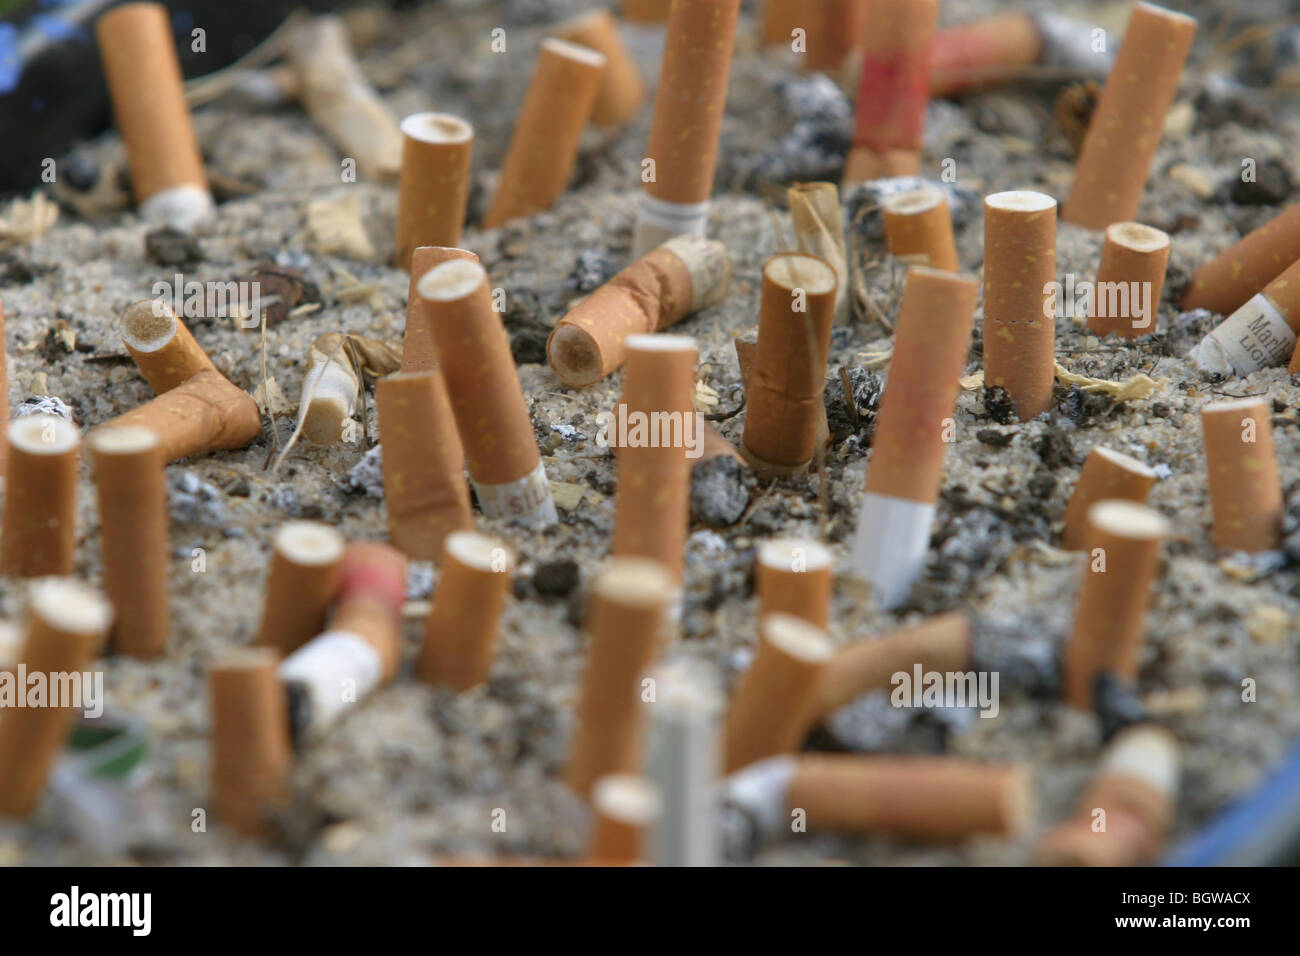 Used smoked cigarette stubs in an ashtray of sand and grit. Stock Photo